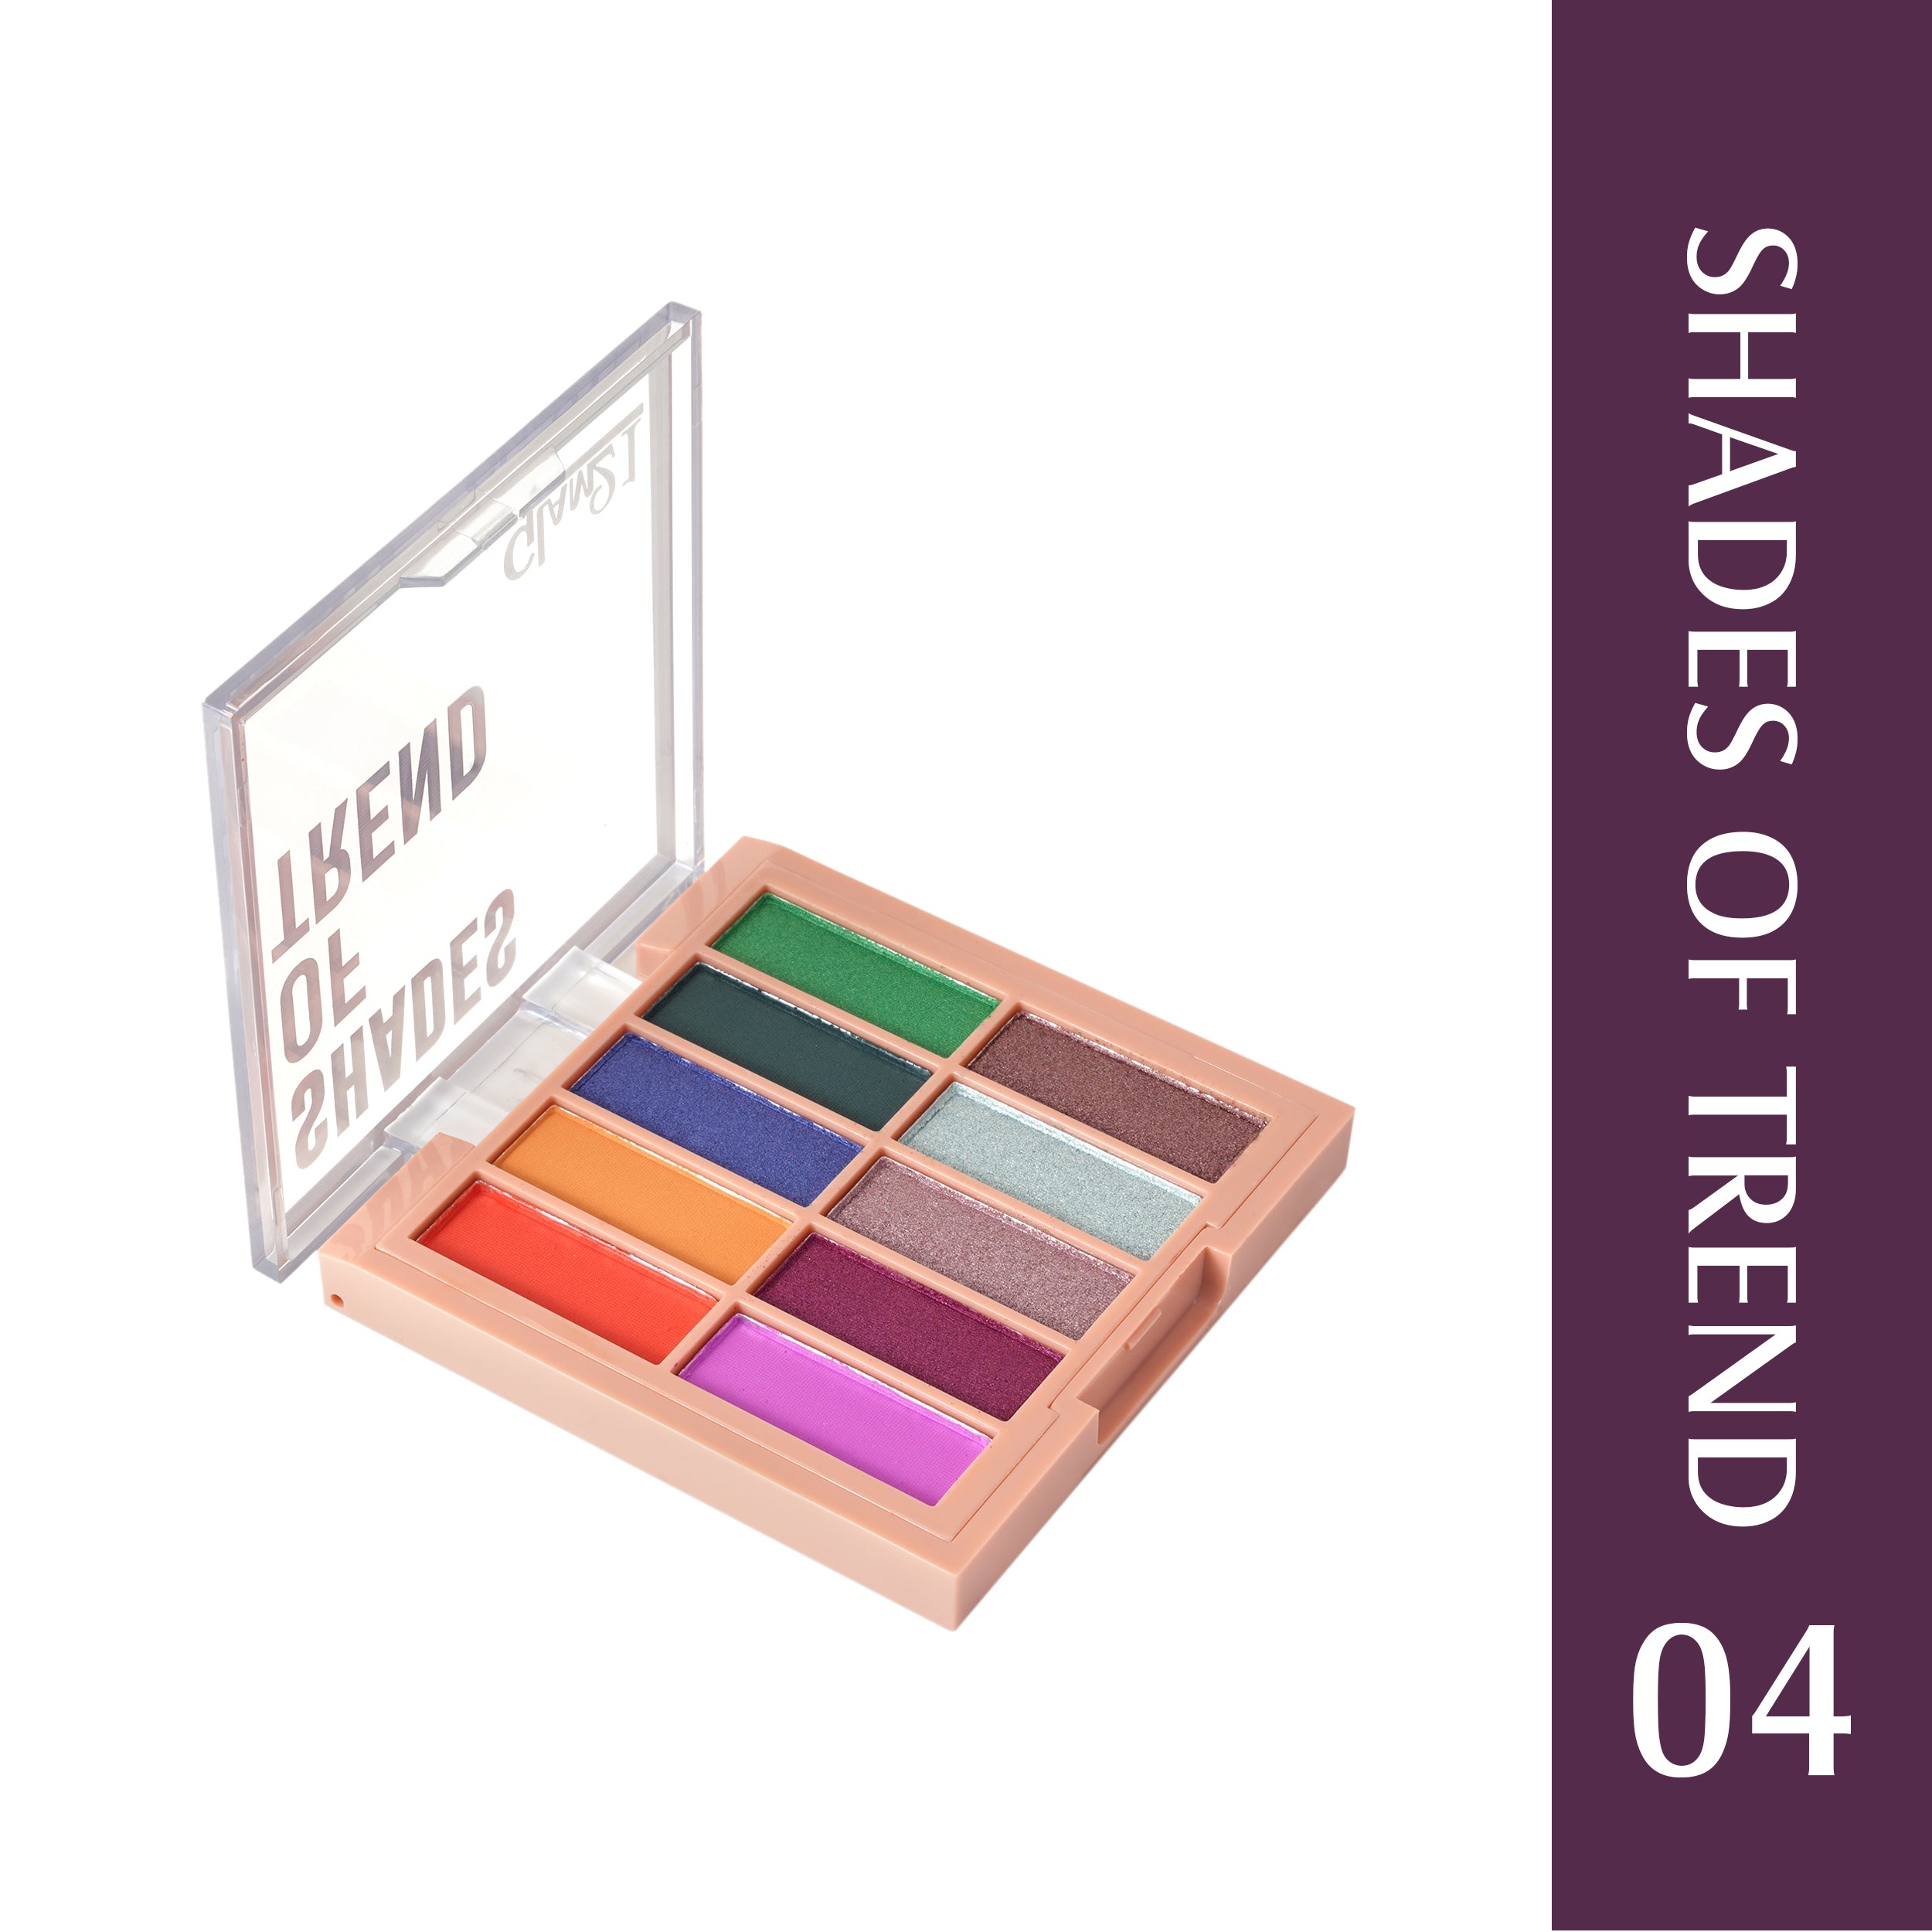 Glam21 Shades of Trend Eyeshadow Palette 10 Highly Pigmented Shades Shimmery Finish, 12gm Shade -04